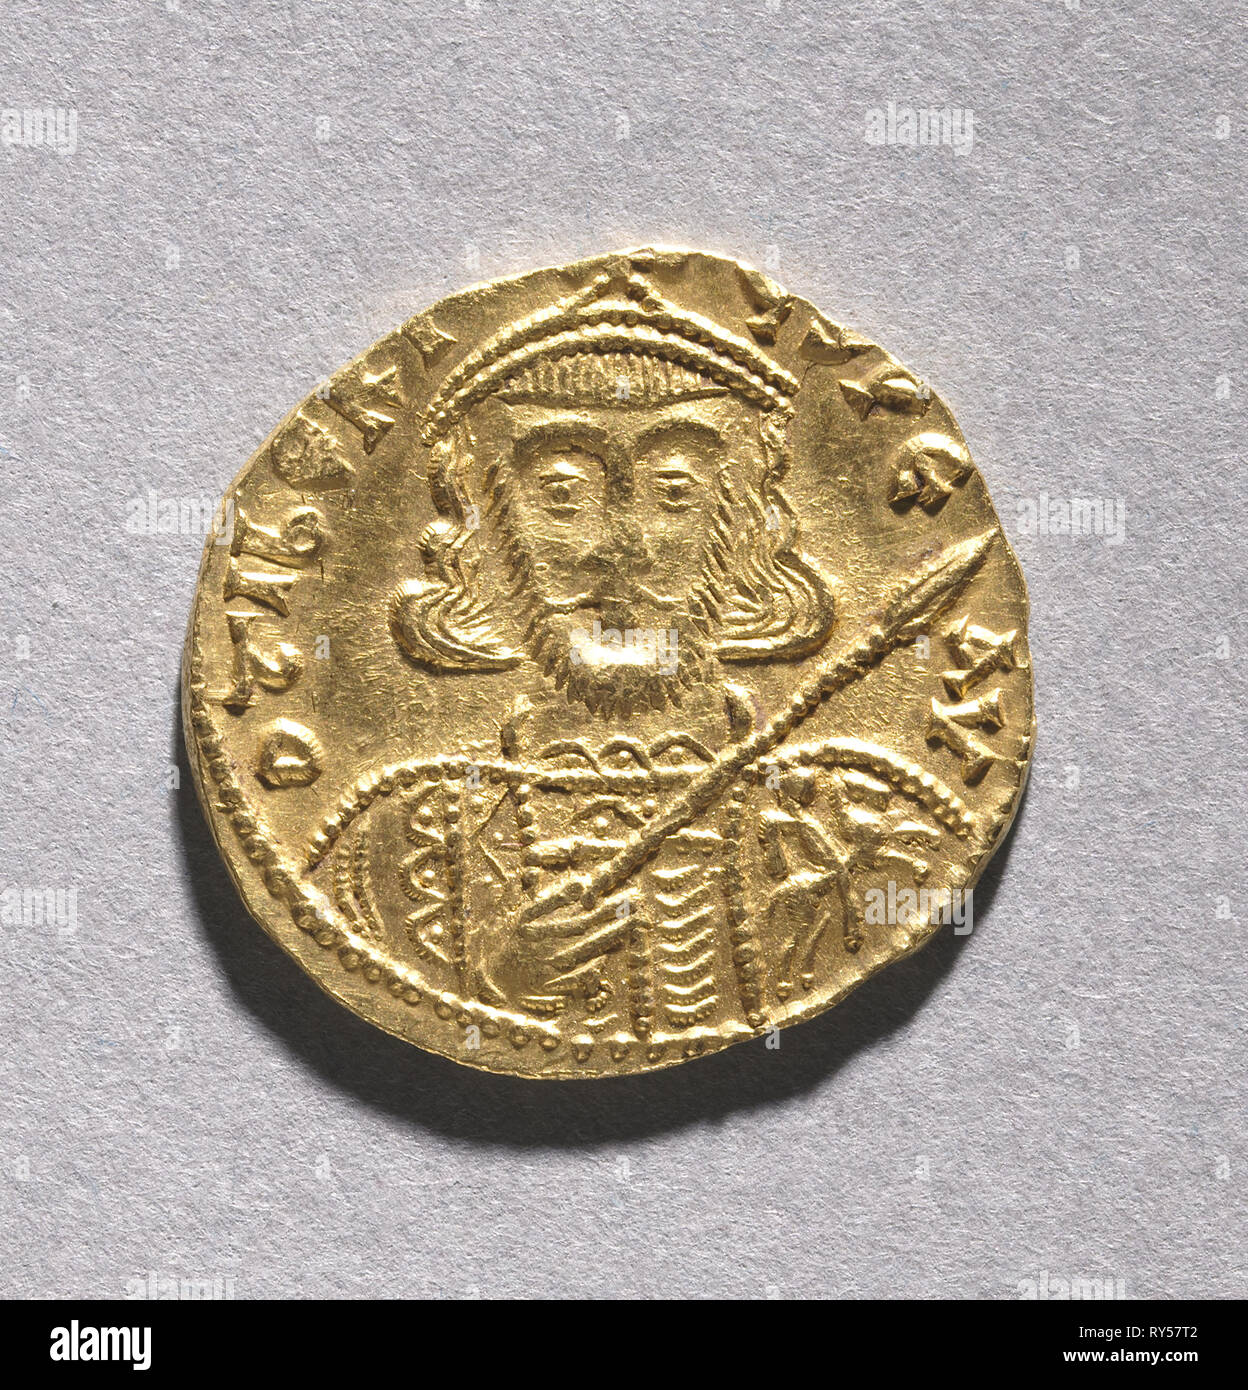 Solidus with Tiberius III Apsimarus (obverse), 698-705. Byzantium, Constantinople, late 7th-early 8th century. Gold; diameter: 2 cm (13/16 in Stock Photo